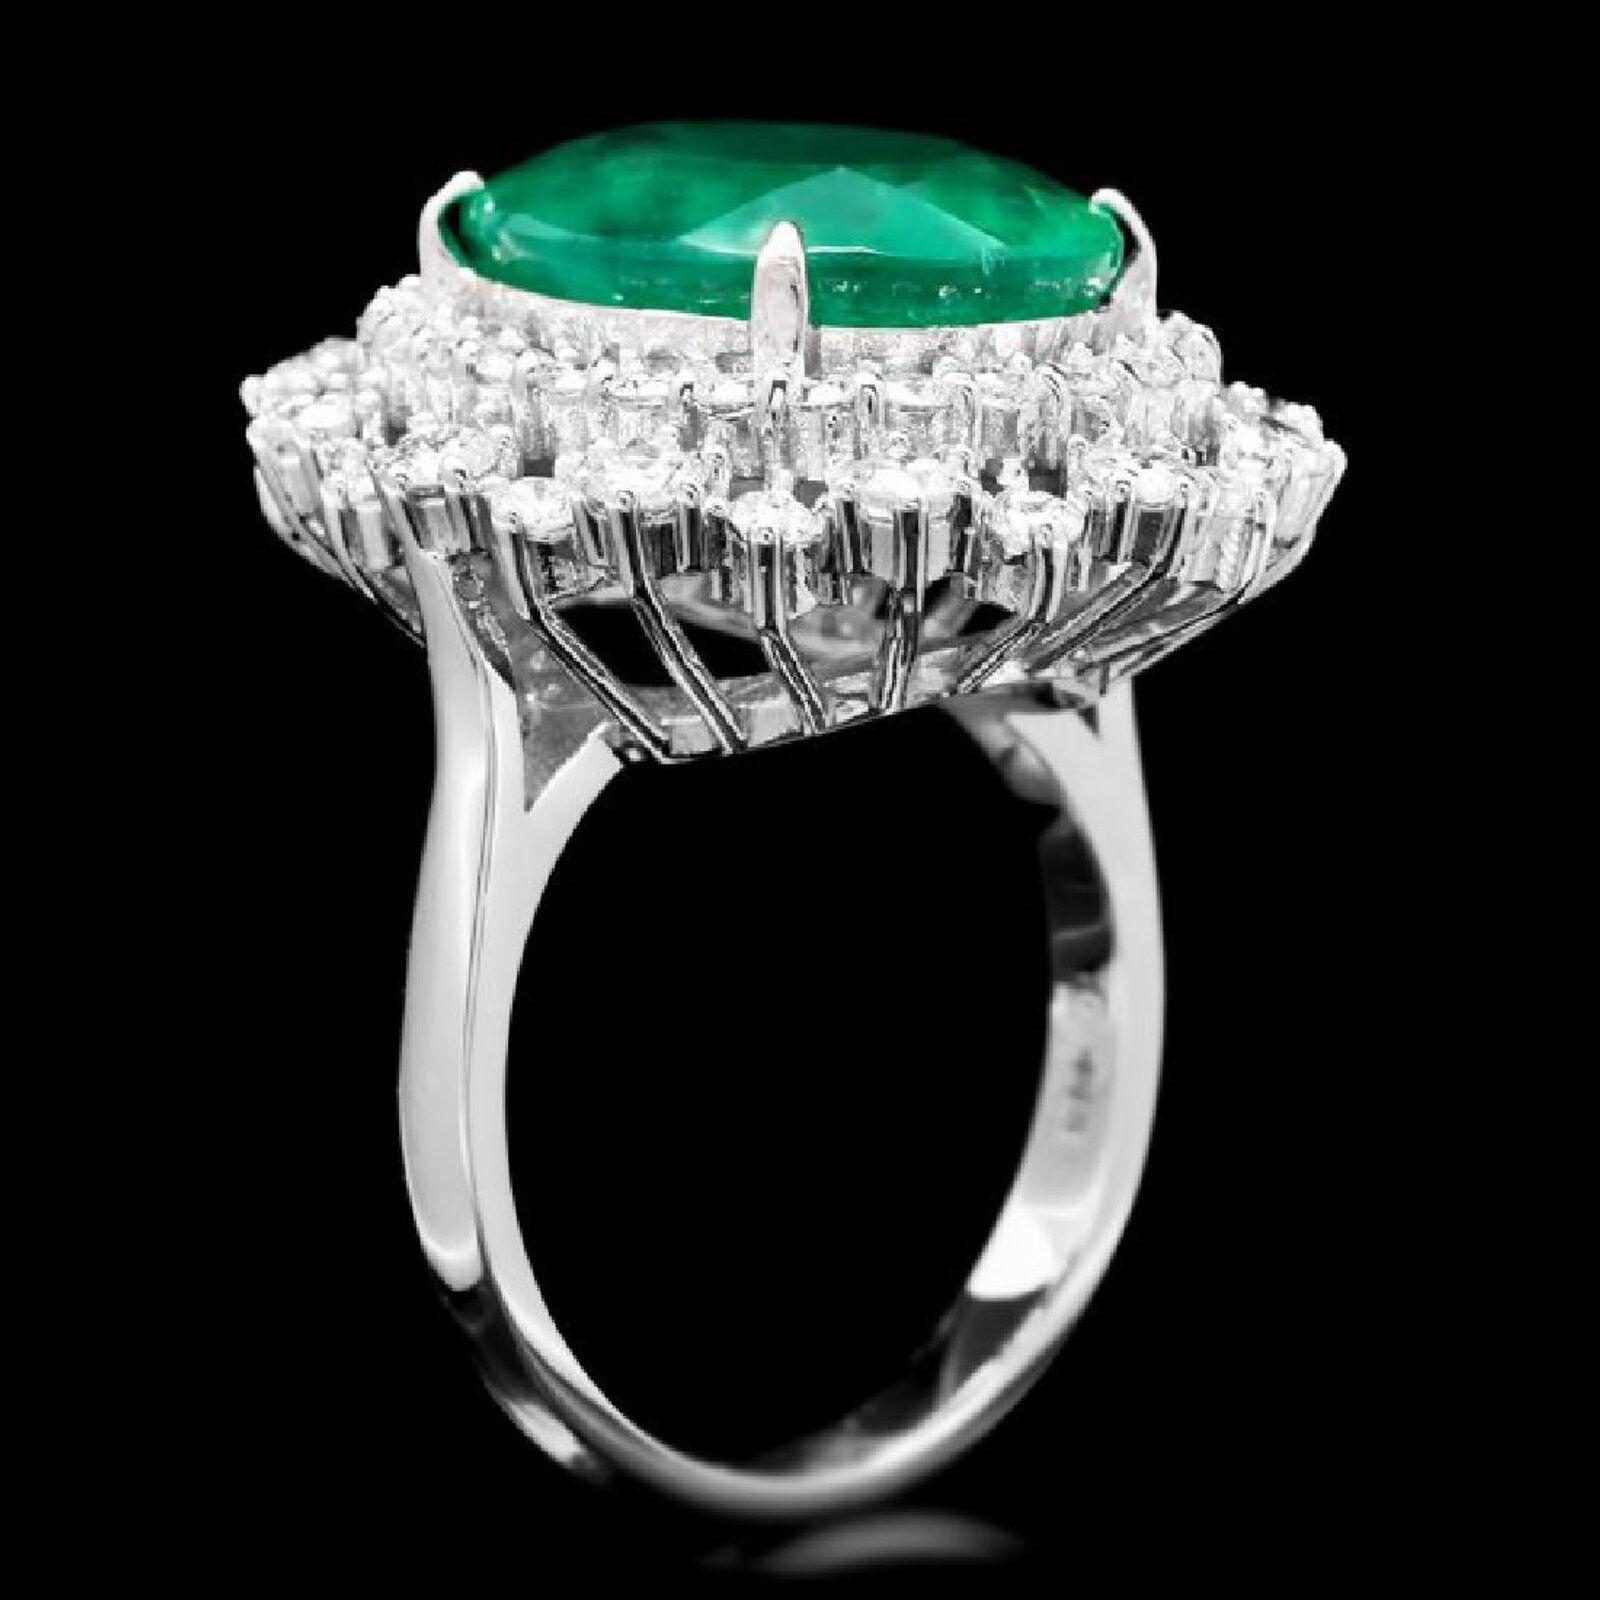 8.00 Carats Natural Emerald and Diamond 14K Solid White Gold Ring

Suggested Replacement Value: $9,300.00

Total Natural Green Emerald Weight is: Approx. 6.50 Carats (transparent) (Oil Treated)

Emerald Measures: Approx. 14.80.00 x 18.80mm

Natural